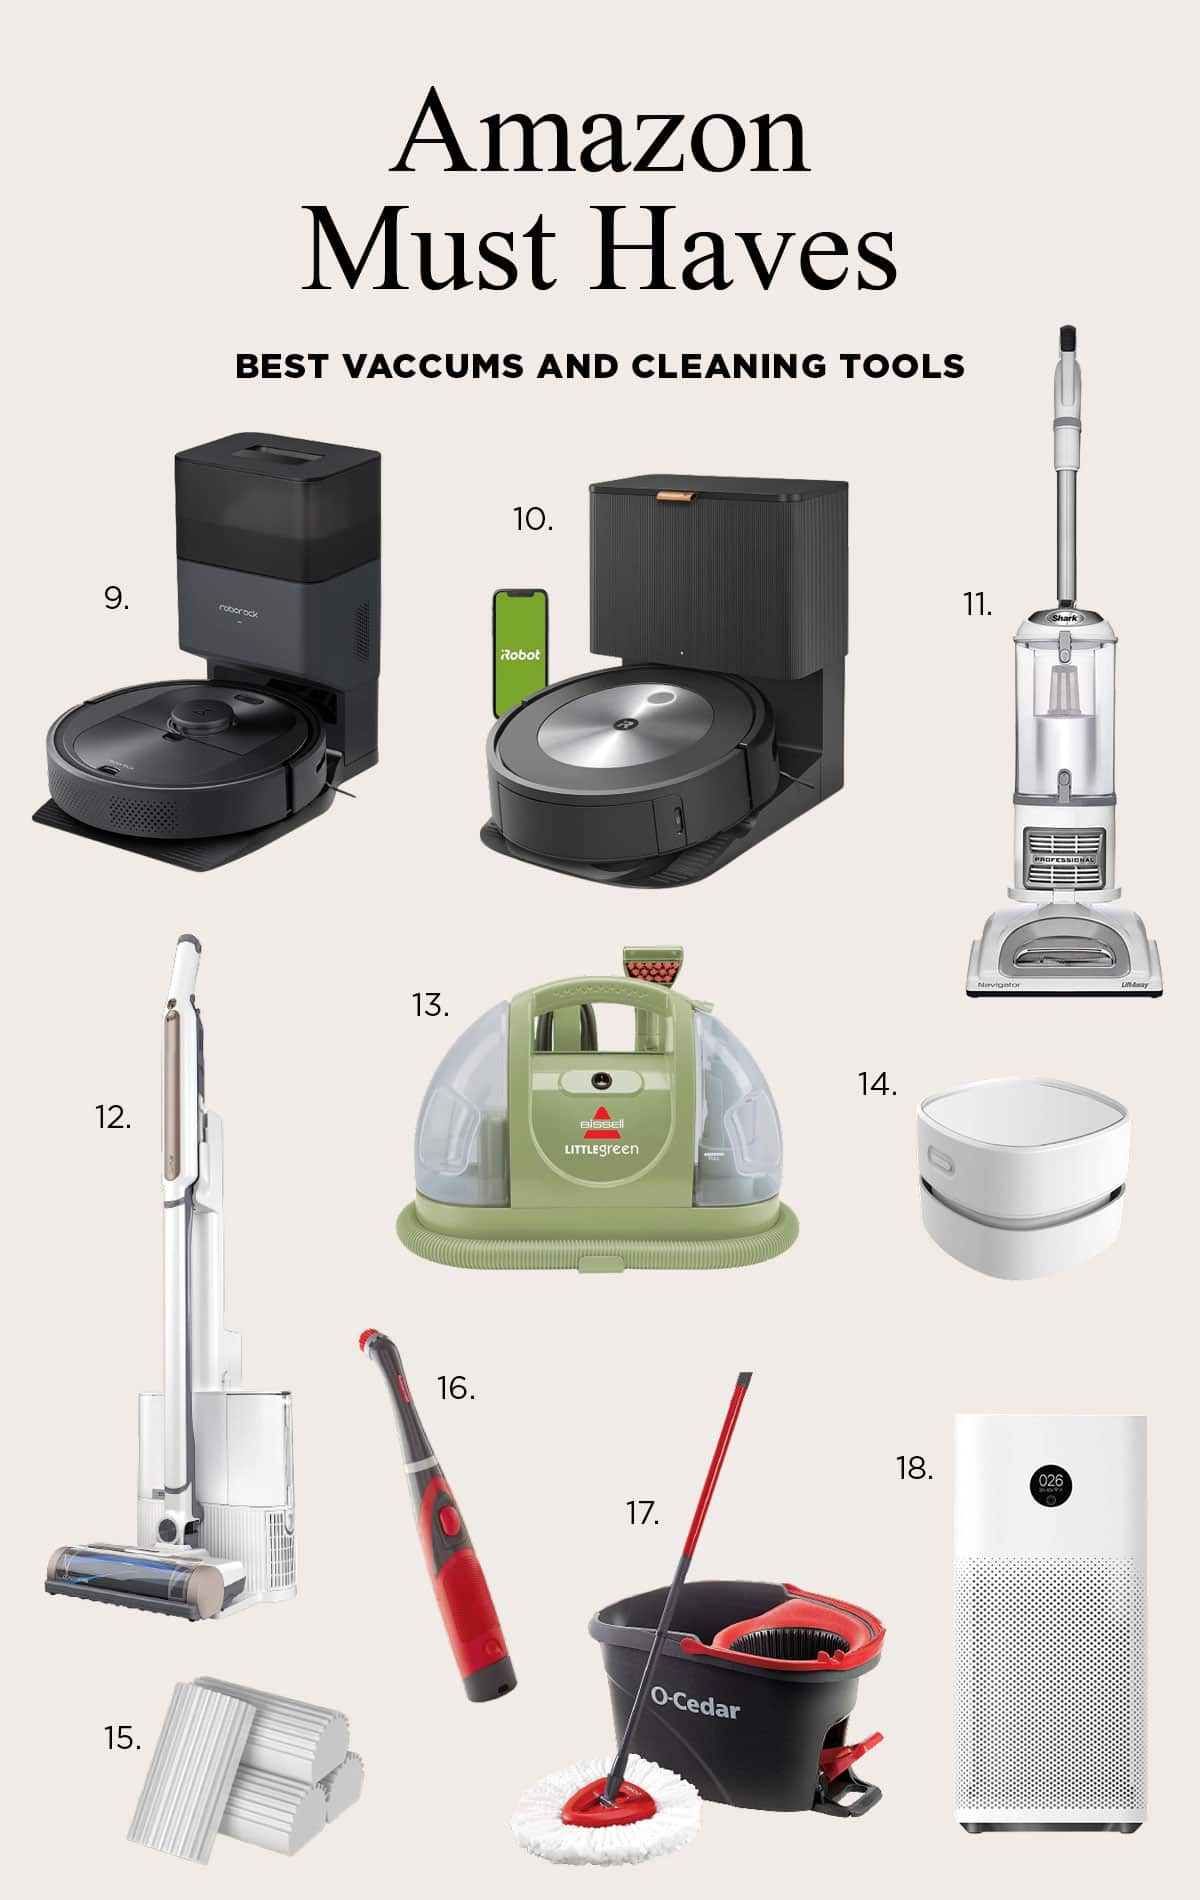 Amazon Must Haves - Cool finds on Amazon, hidden gems, and best sellers like these top selling vacuums and cleaning tools